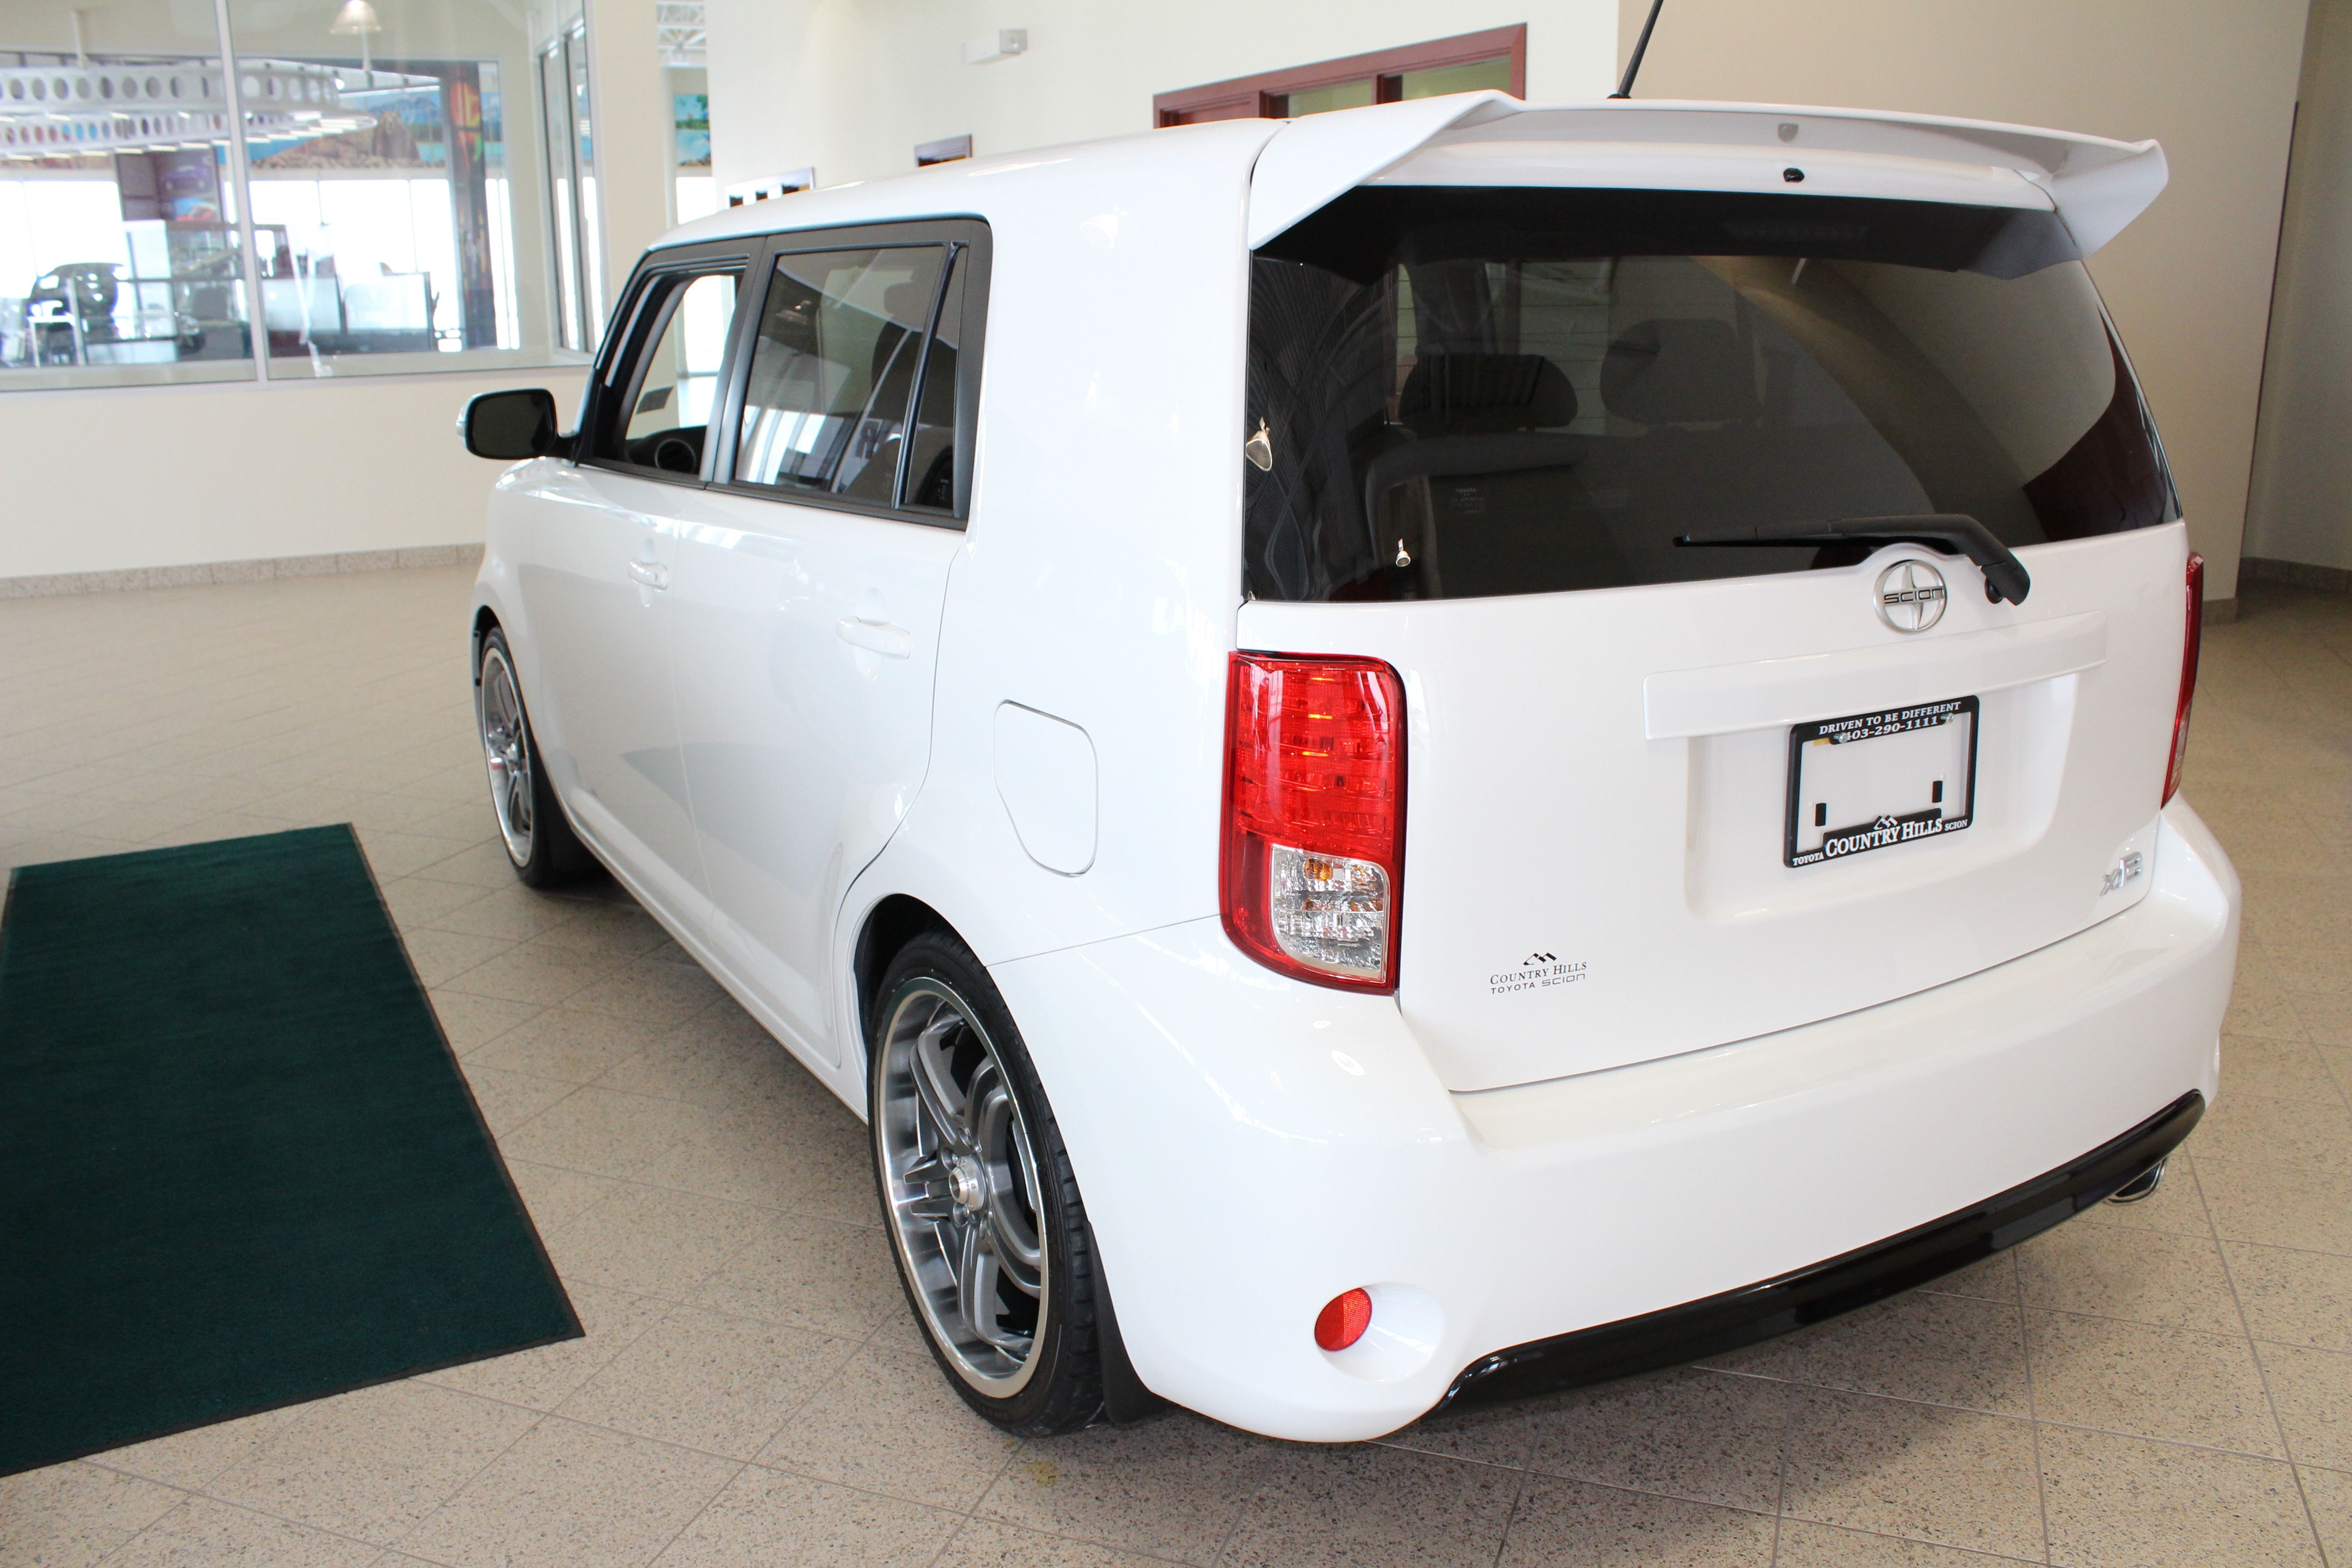 2013 Scion xB with TRD rims and exhaust rear spoiler